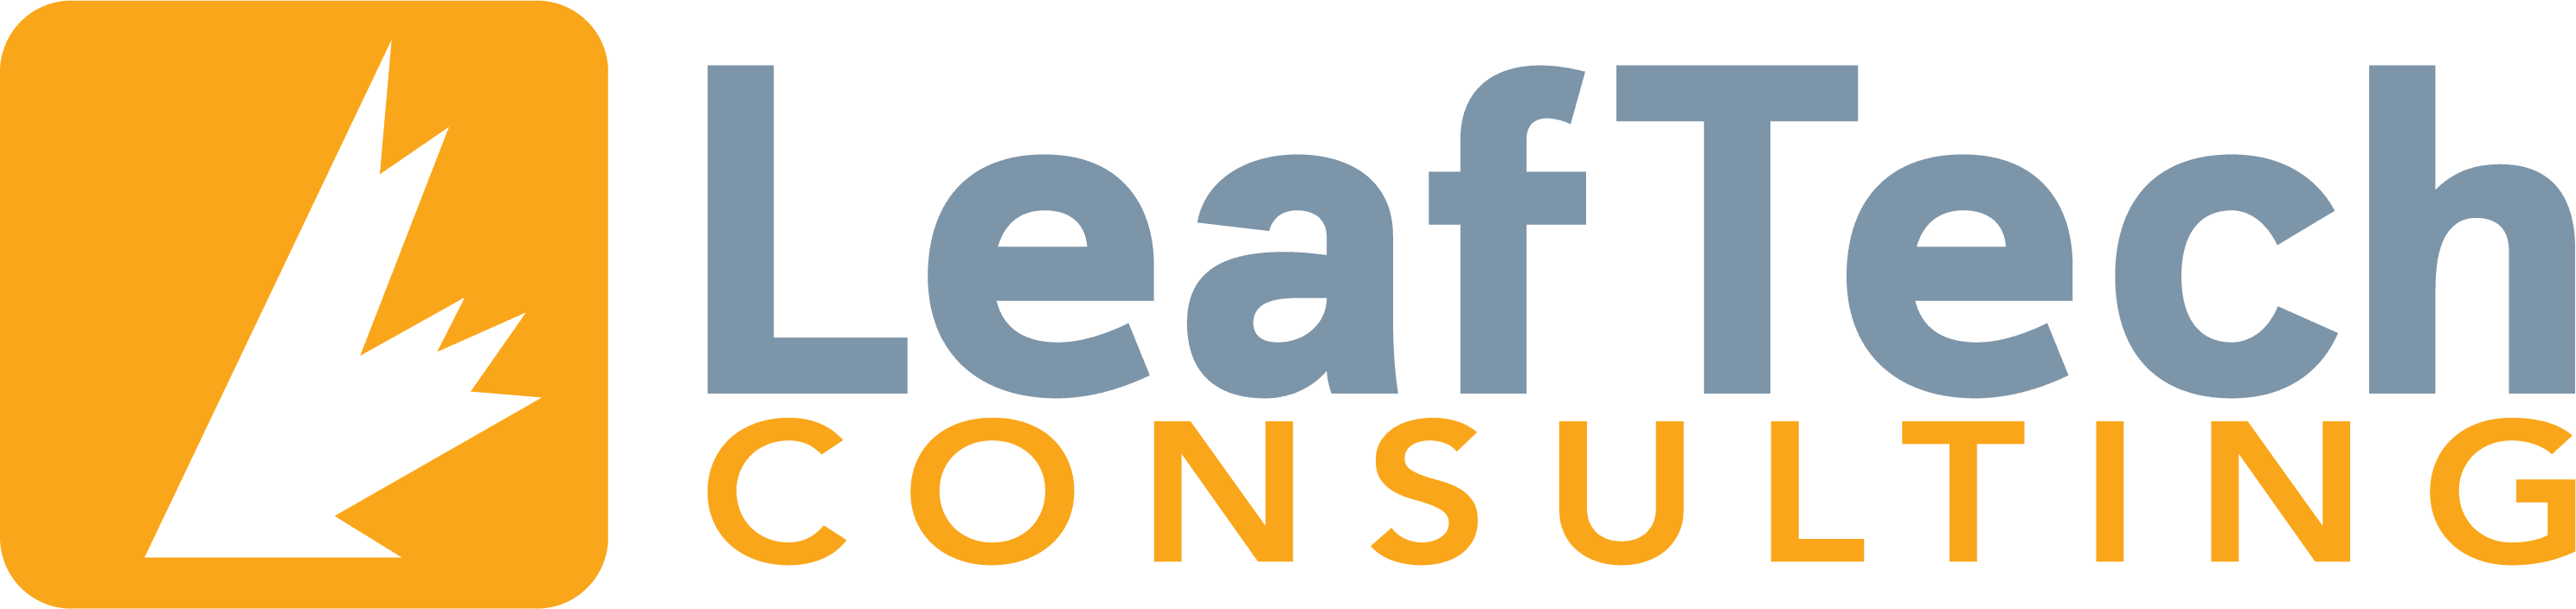 LeafTech Consulting